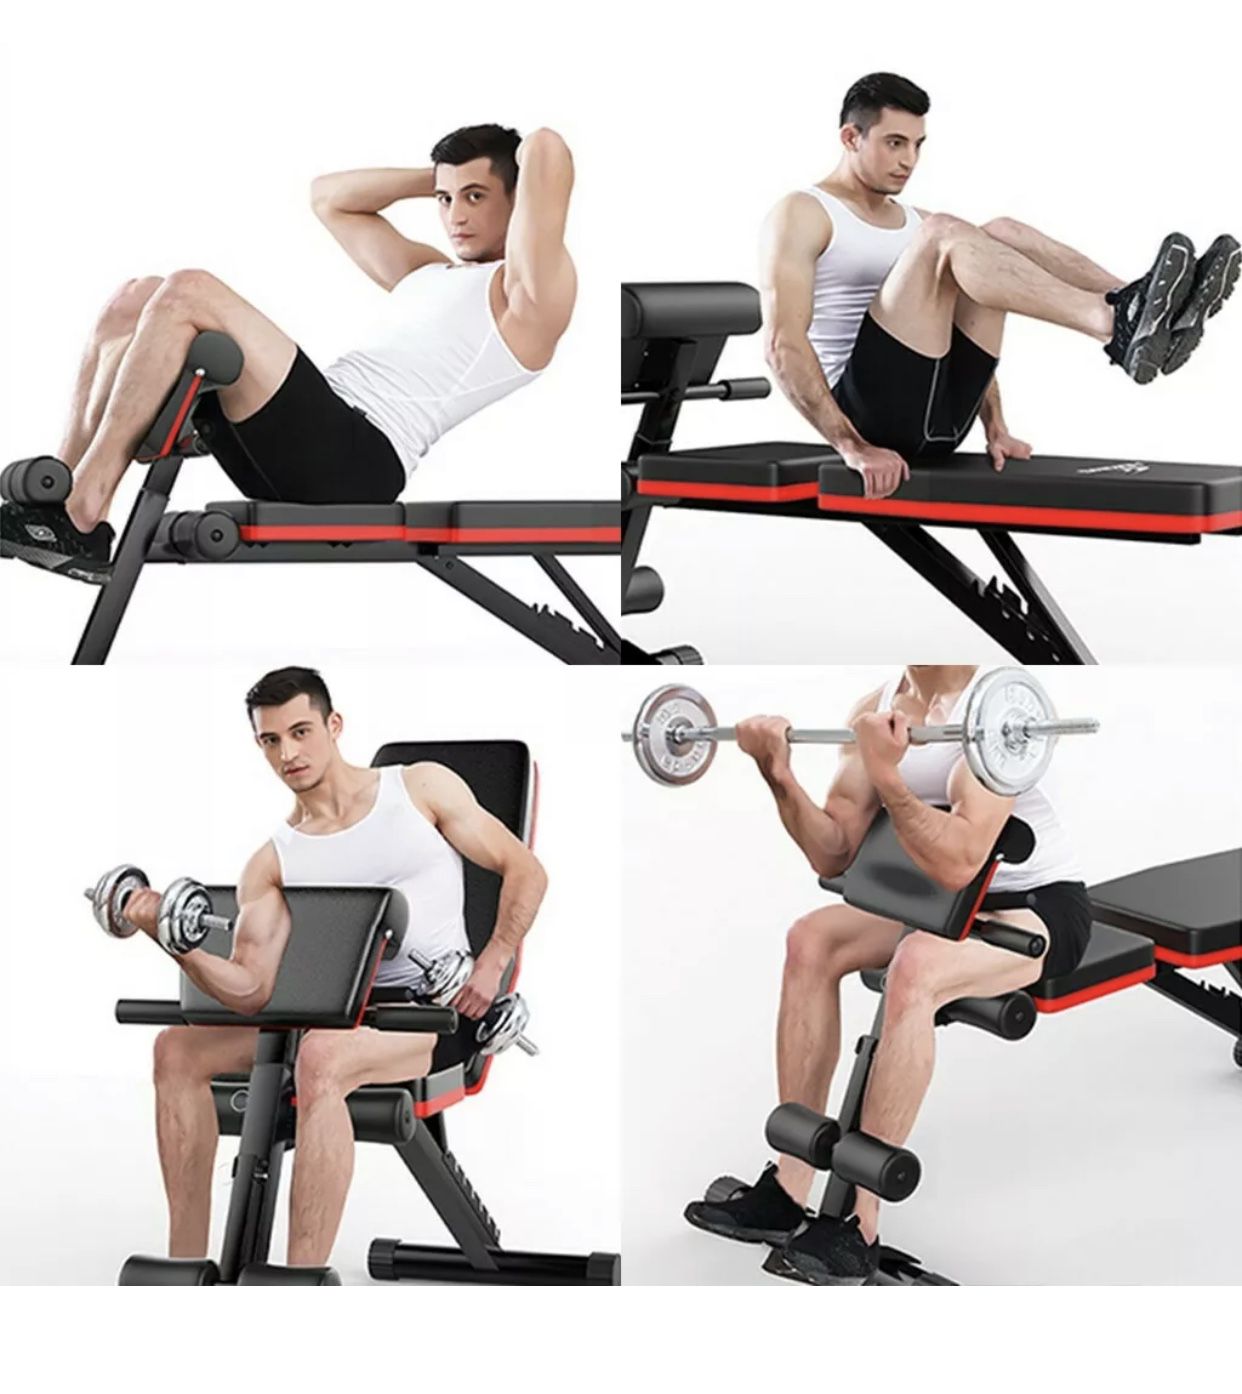 Weight Bench Adjustable Strength Training Exercise Bench for Full Body Workout A